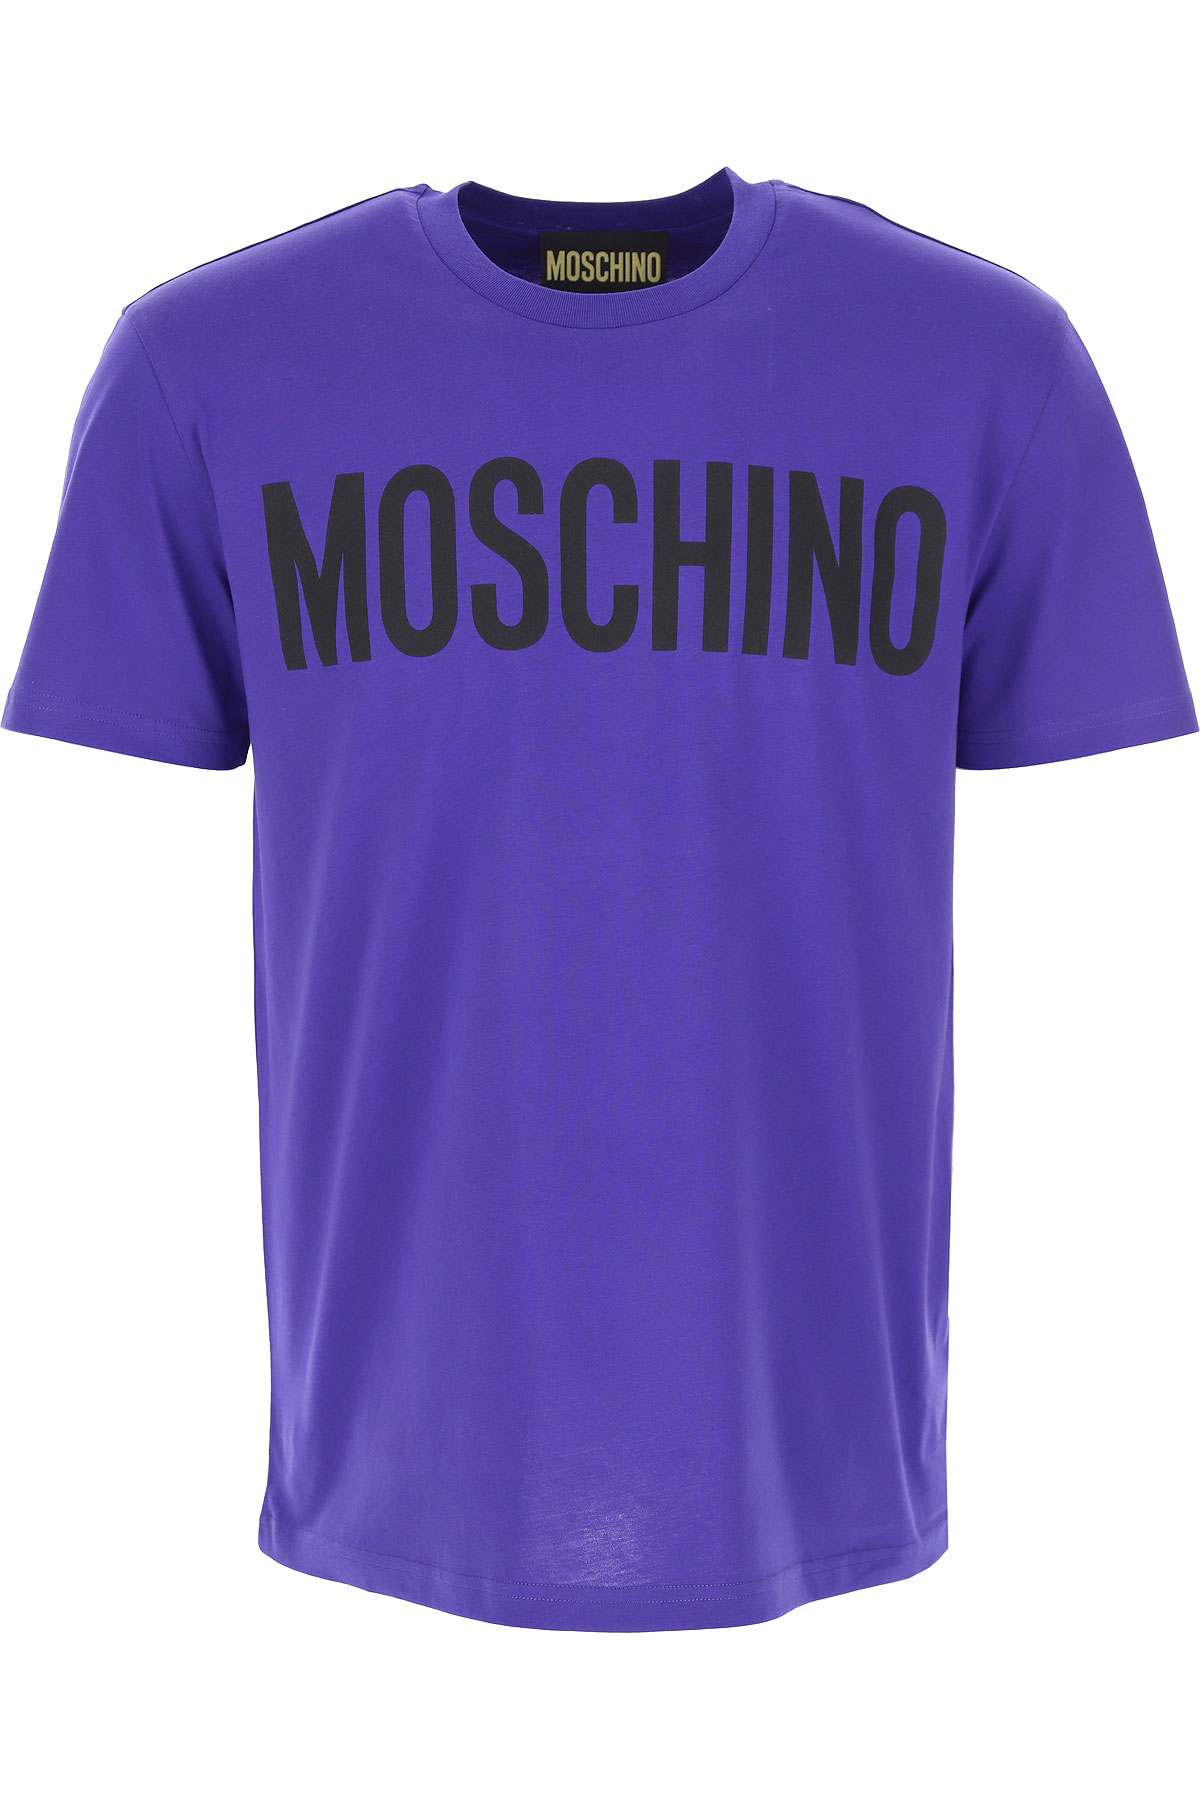 Mens Clothing Moschino, Style code: a0701-5241-1278